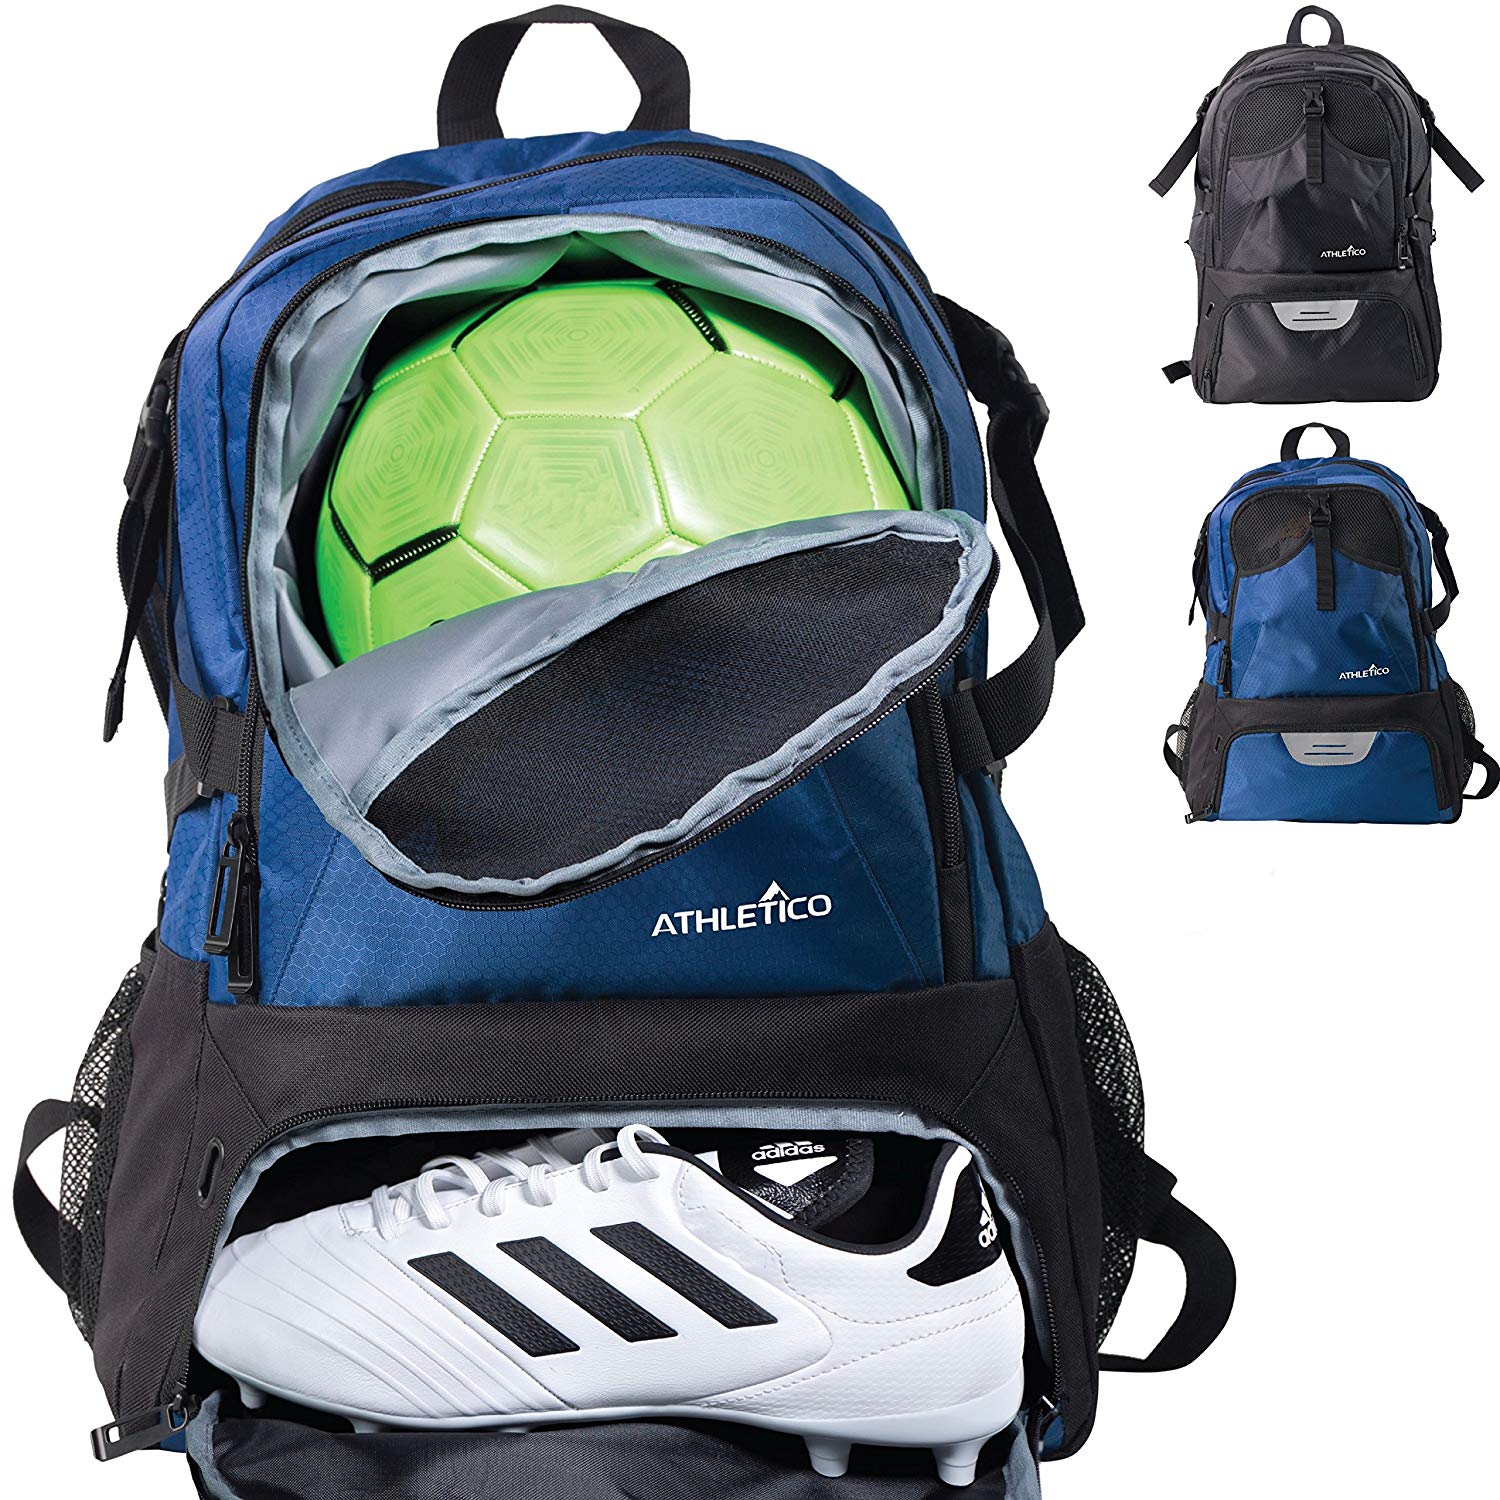 Athletico national soccer bag – backpack for soccer, basketball & football includes separate cleat and ball holder – youth, kids, girls, boys, men & women